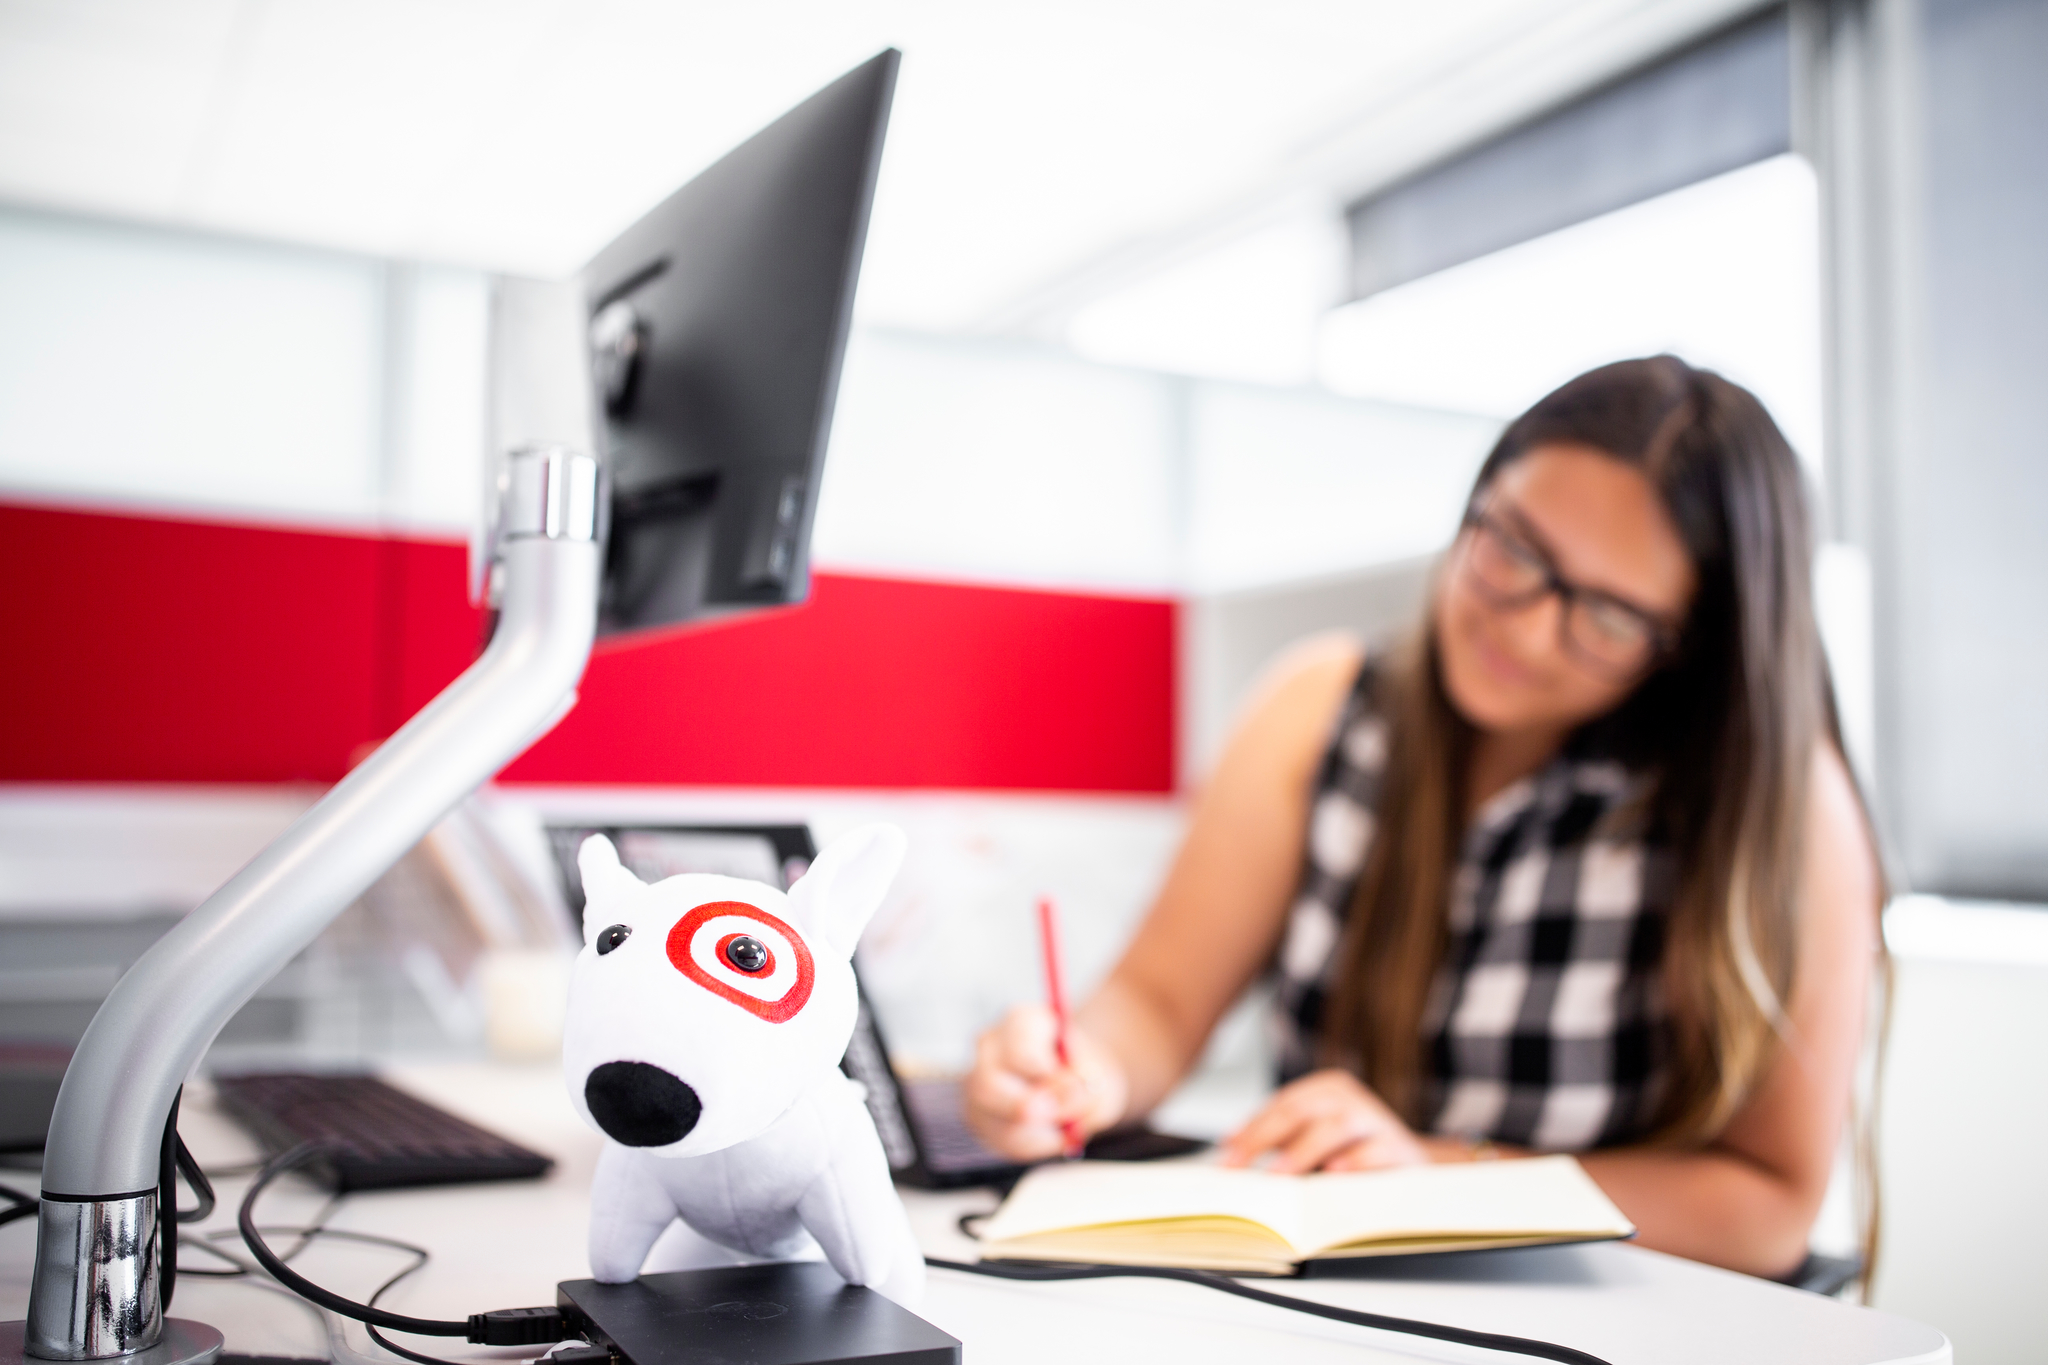 A DFC student works at Target during her internship